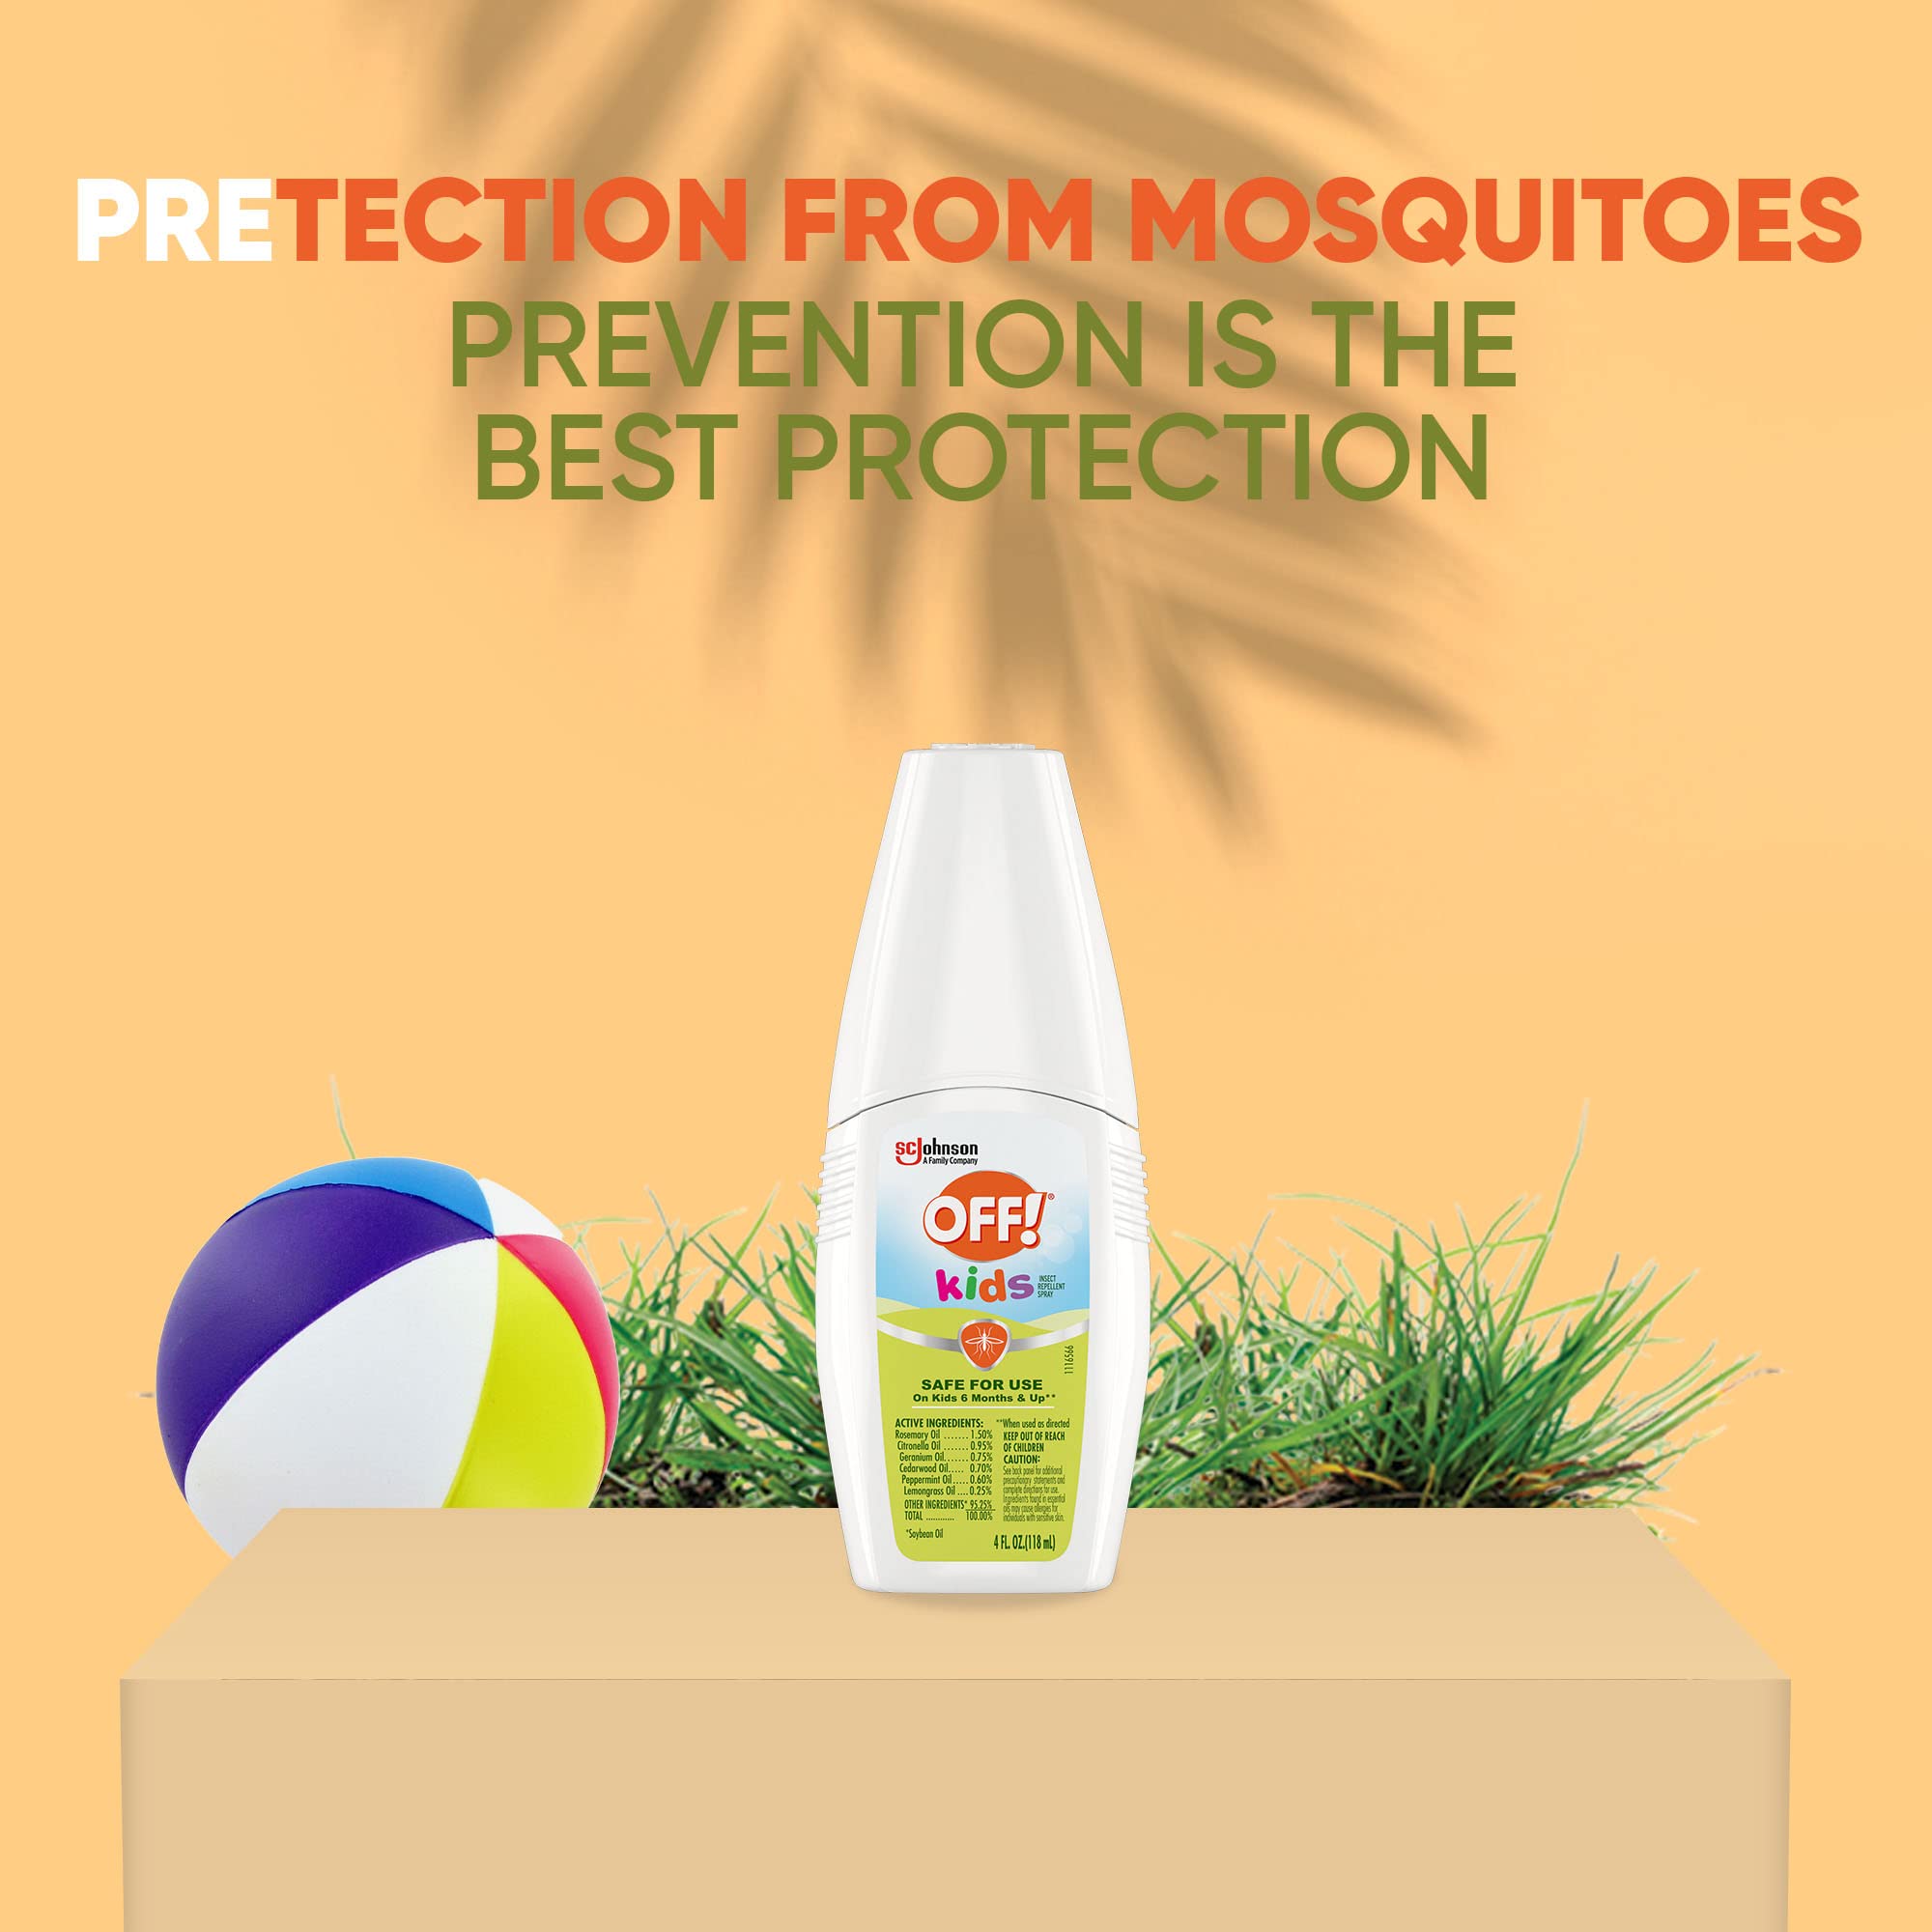 OFF! Kids Insect Repellent Spray, 100% Plant Based Oils, Safe for Use On Babies, Toddlers and Kids, 4 oz